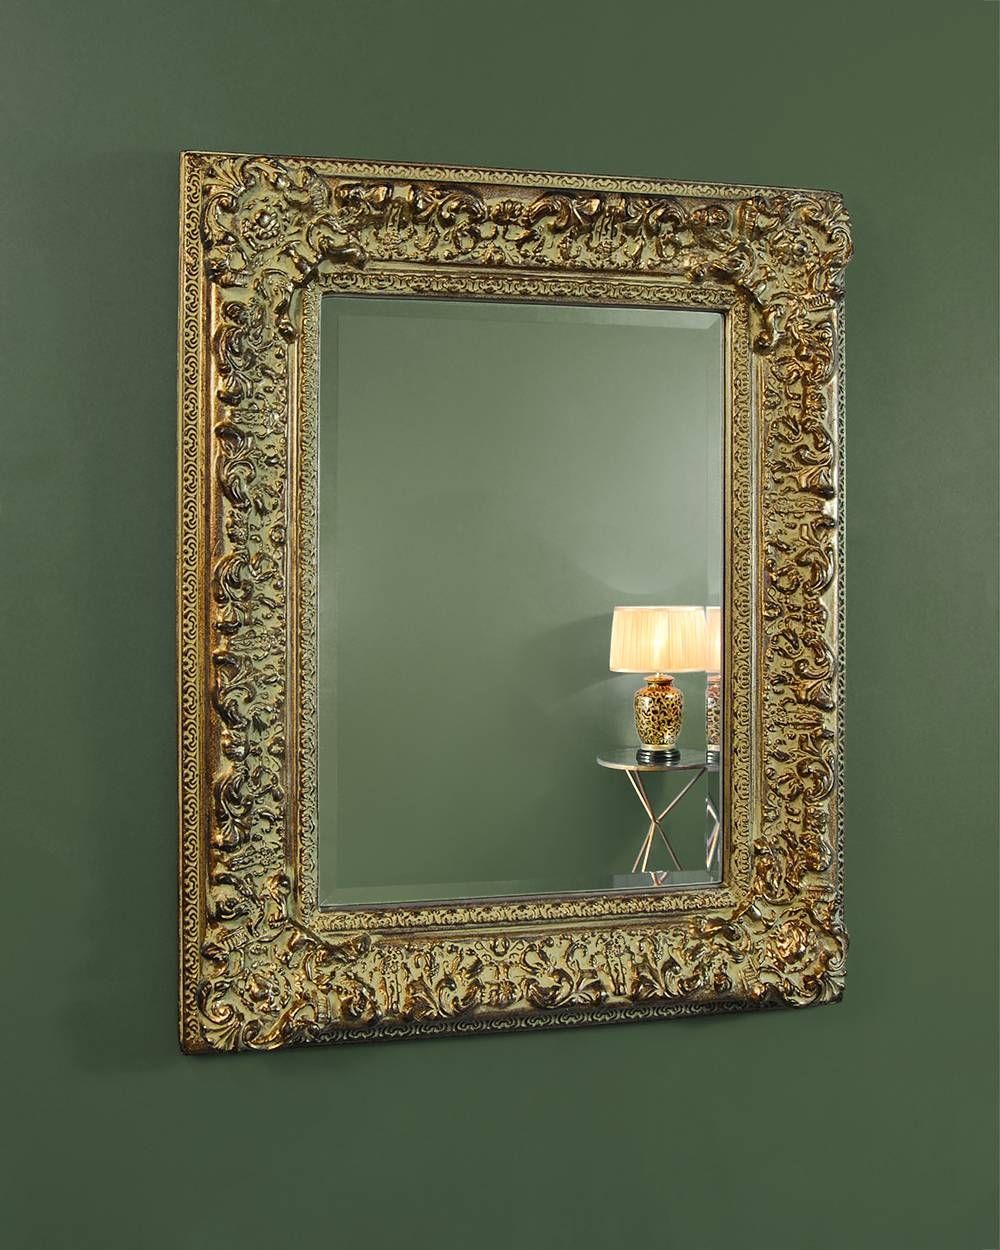 Decorative Mirrors | The Chandelier & Mirror Company Pertaining To Mirrors (View 11 of 15)